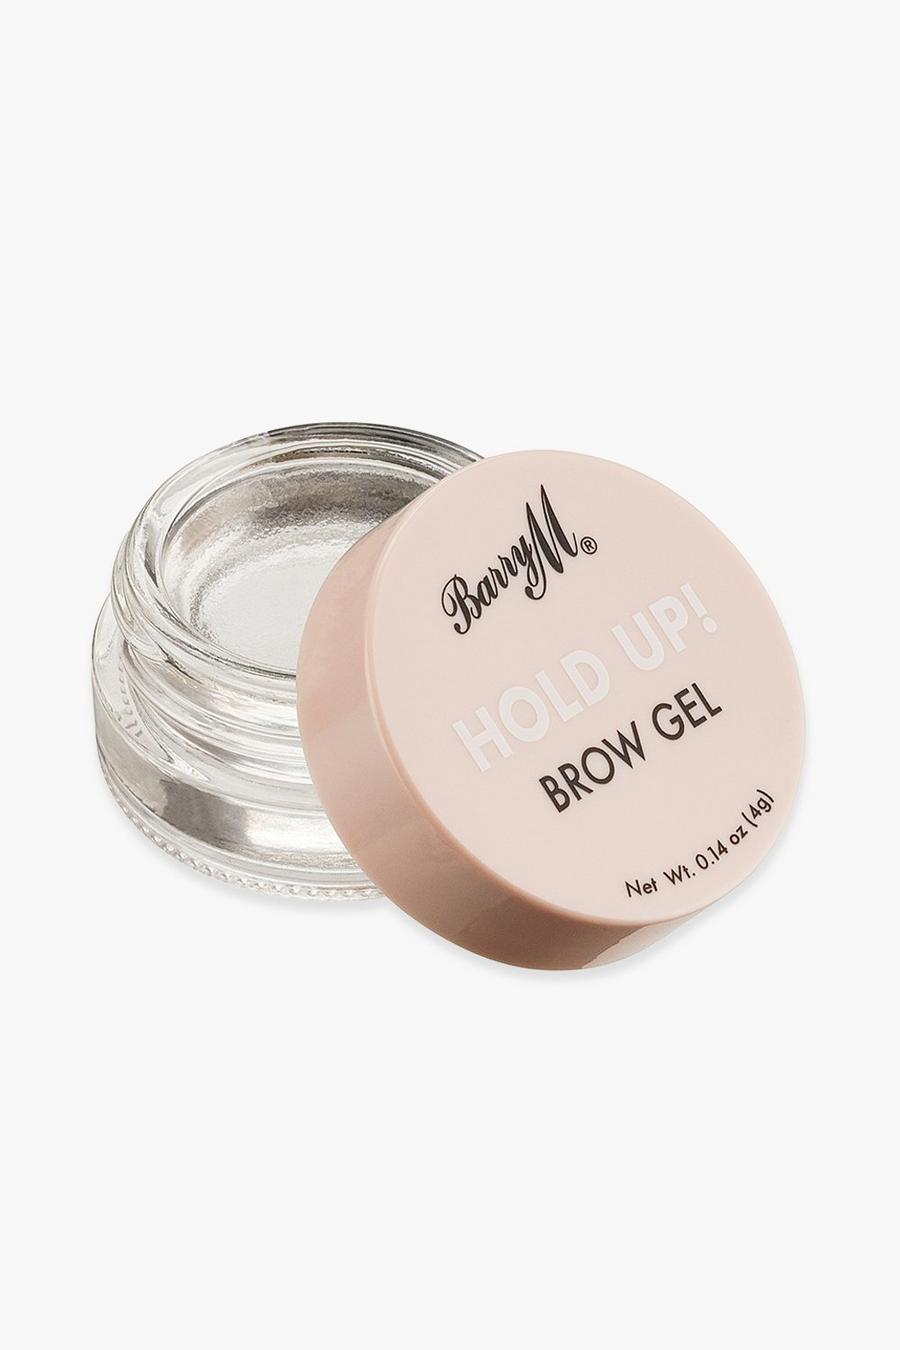 Barry M - Gel pour sourcils - Hold Up!, Brown braun